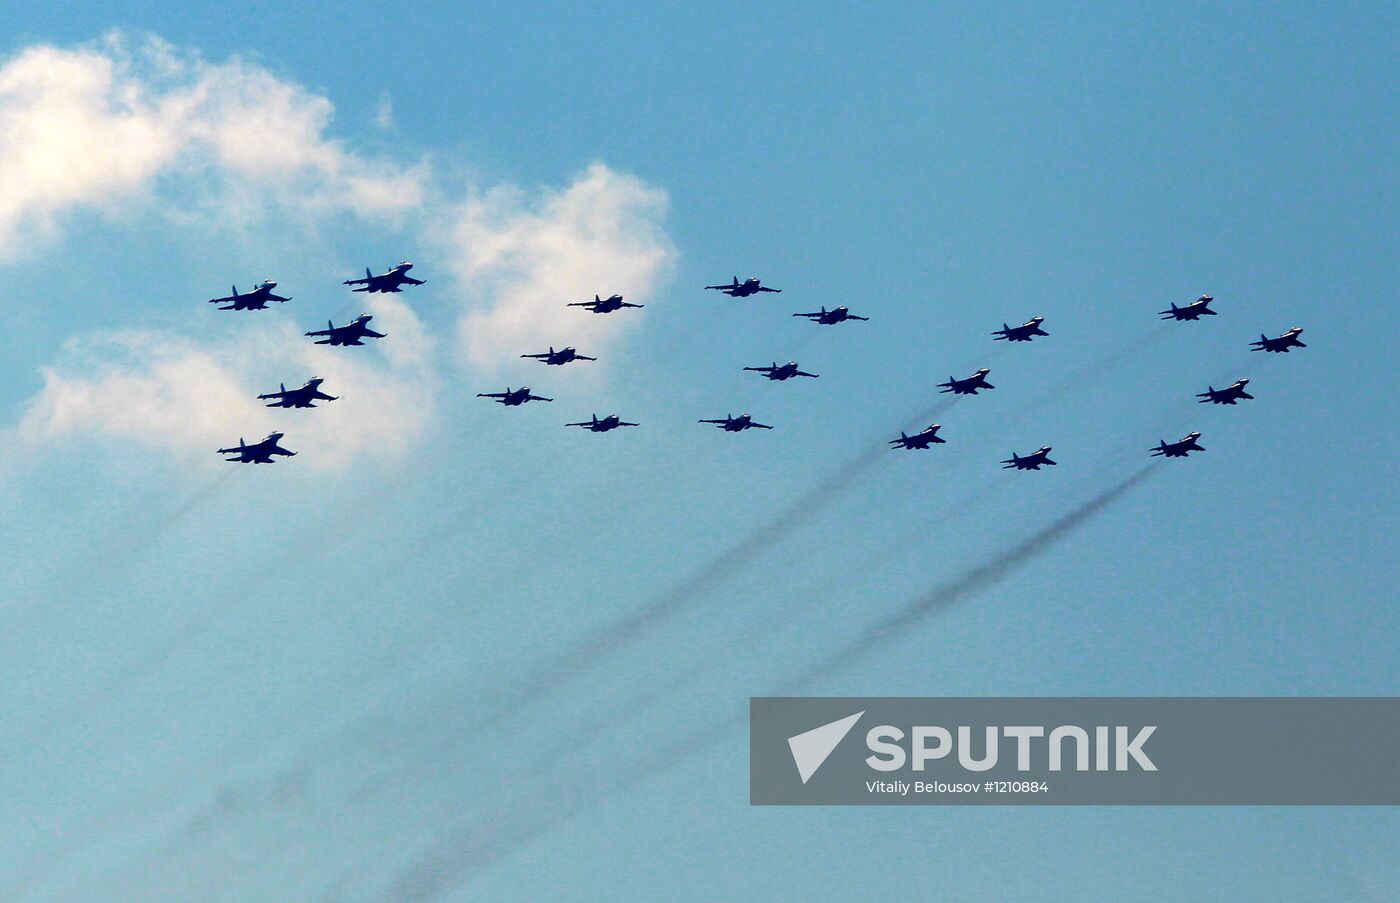 Air show to mark 100th anniversary of Russian Air Force